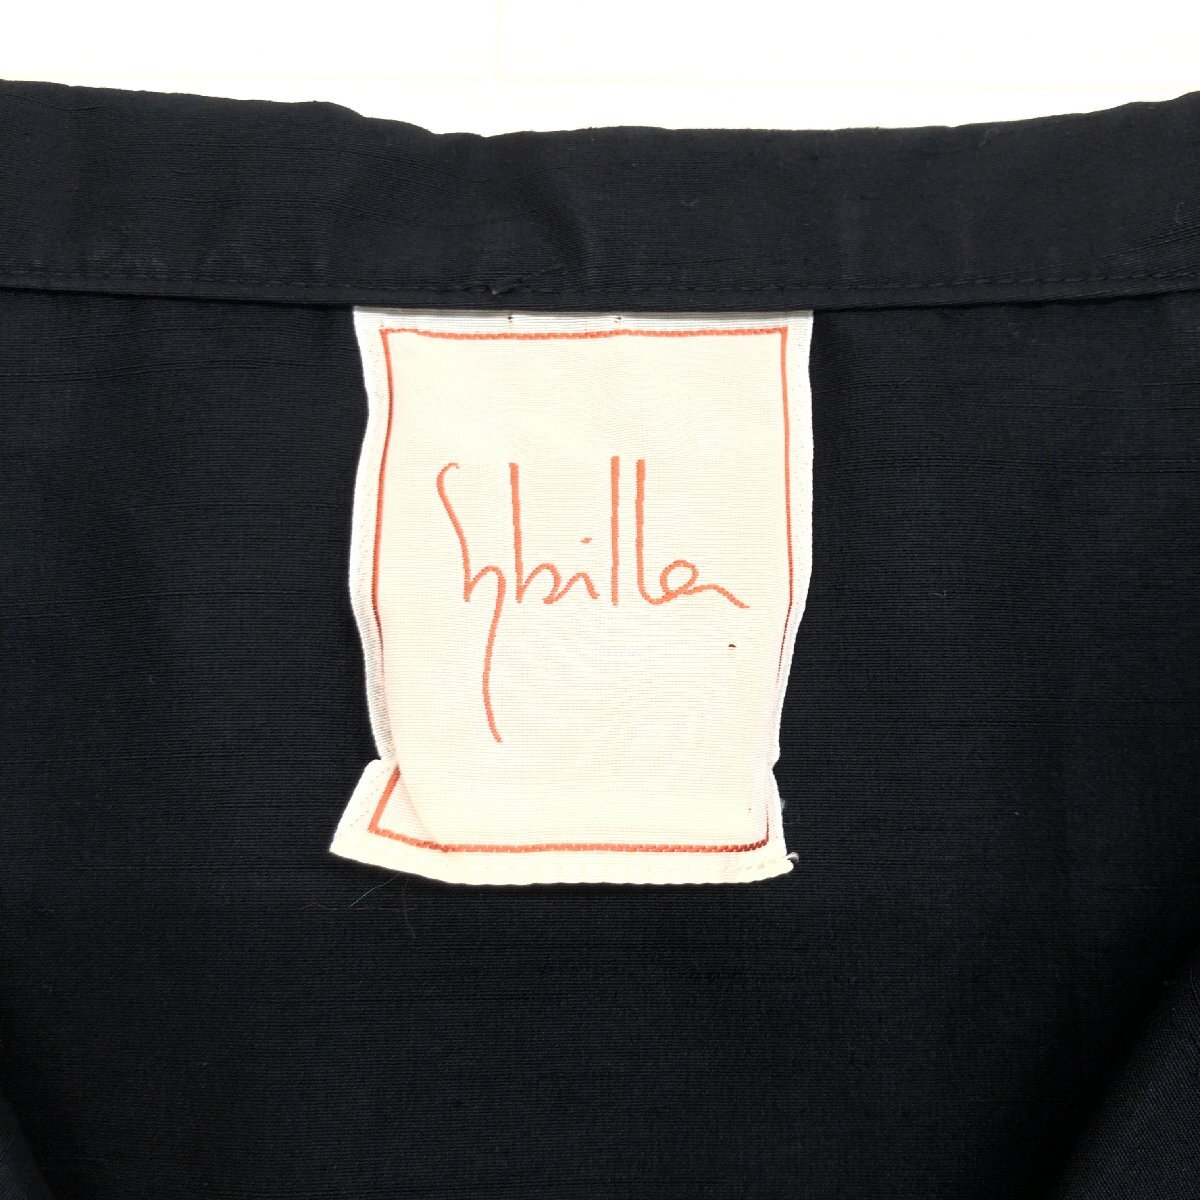 Sybilla Sybilla cropped pants summer jacket M black black made in Japan short feather weave domestic regular goods lady's for women 